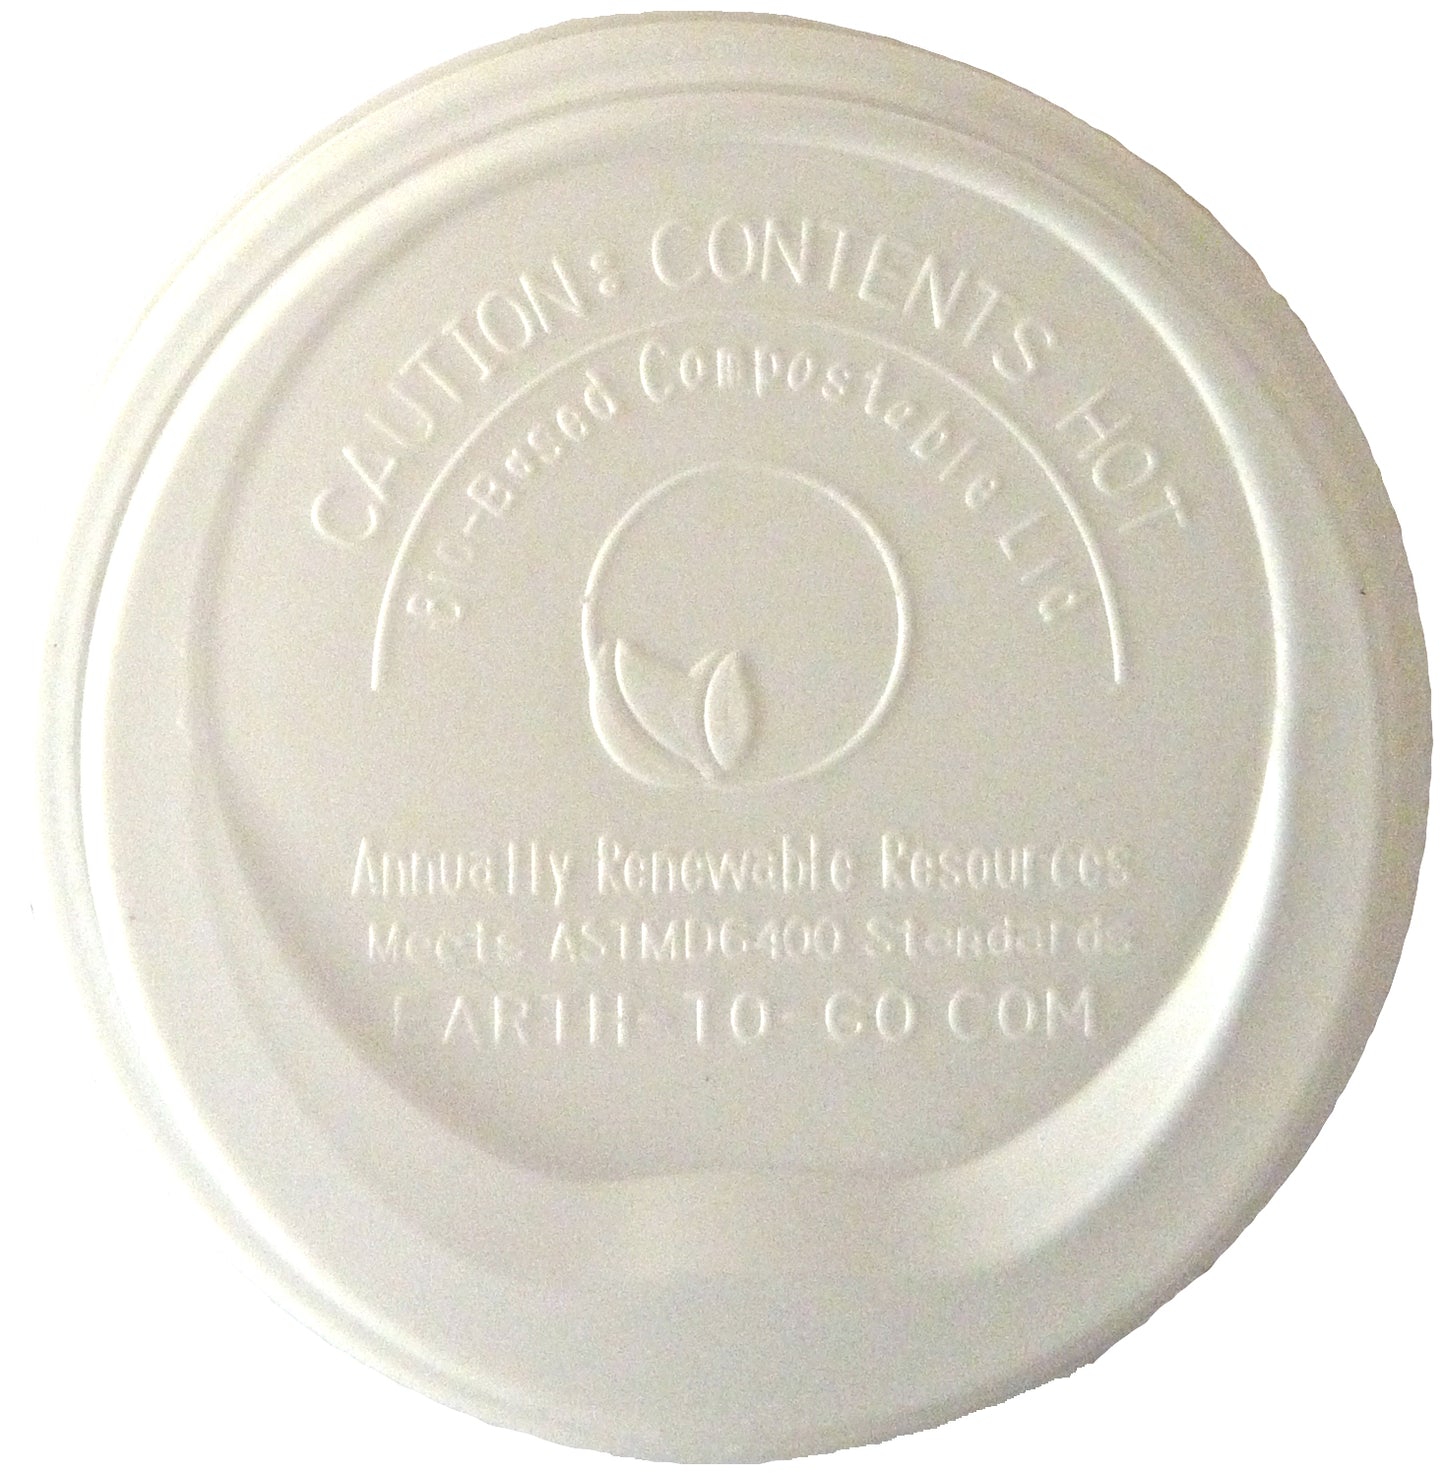 Earth Cup Bio-Based Lids, Compostable